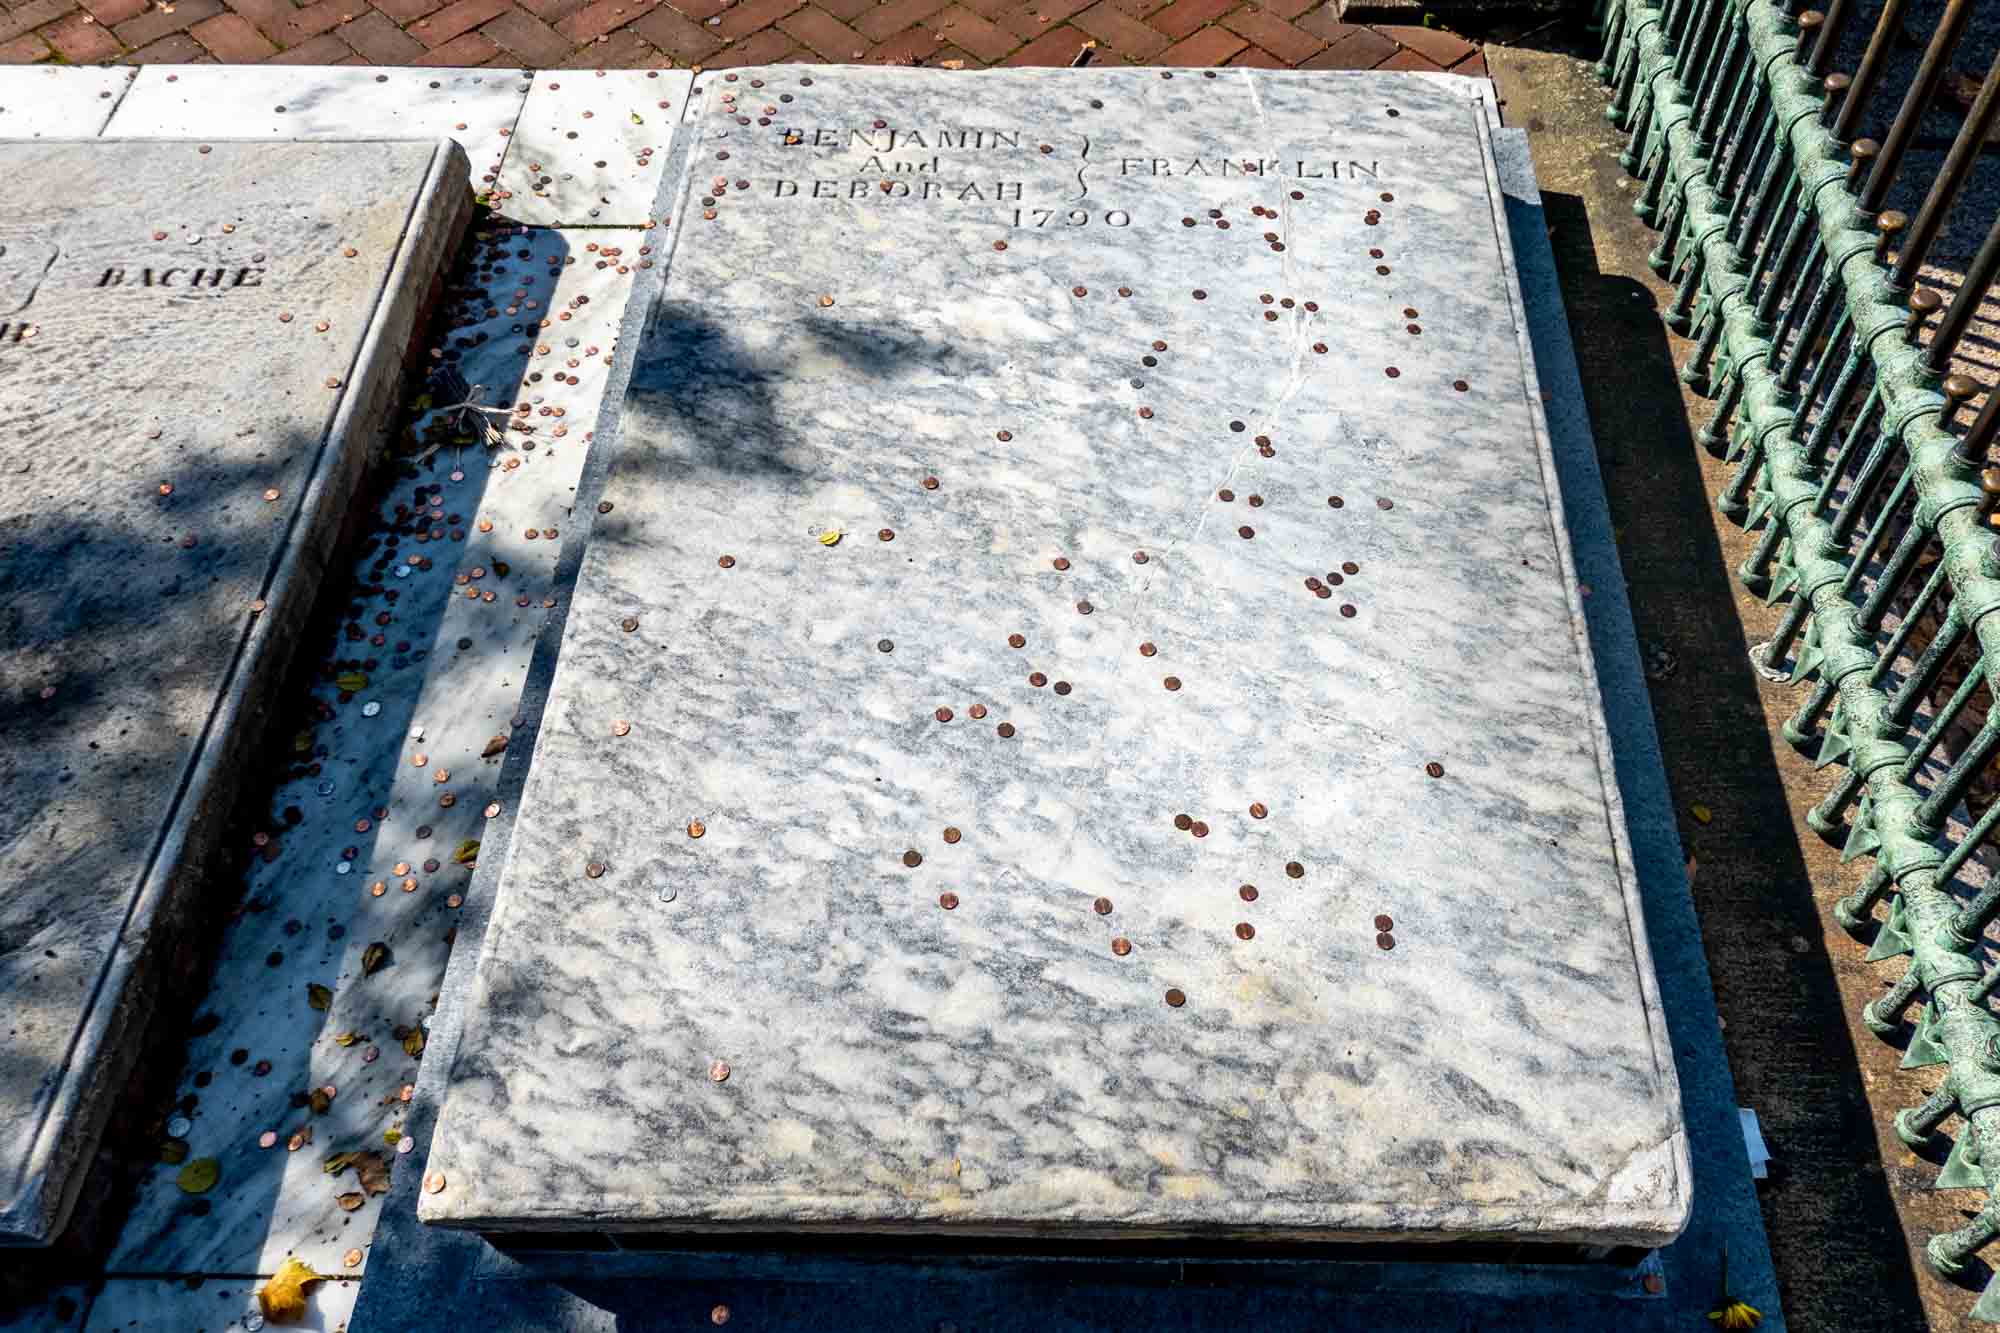 Marble slab scattered with pennies and an inscription: Benjamin and Deborah Franklin, 1790